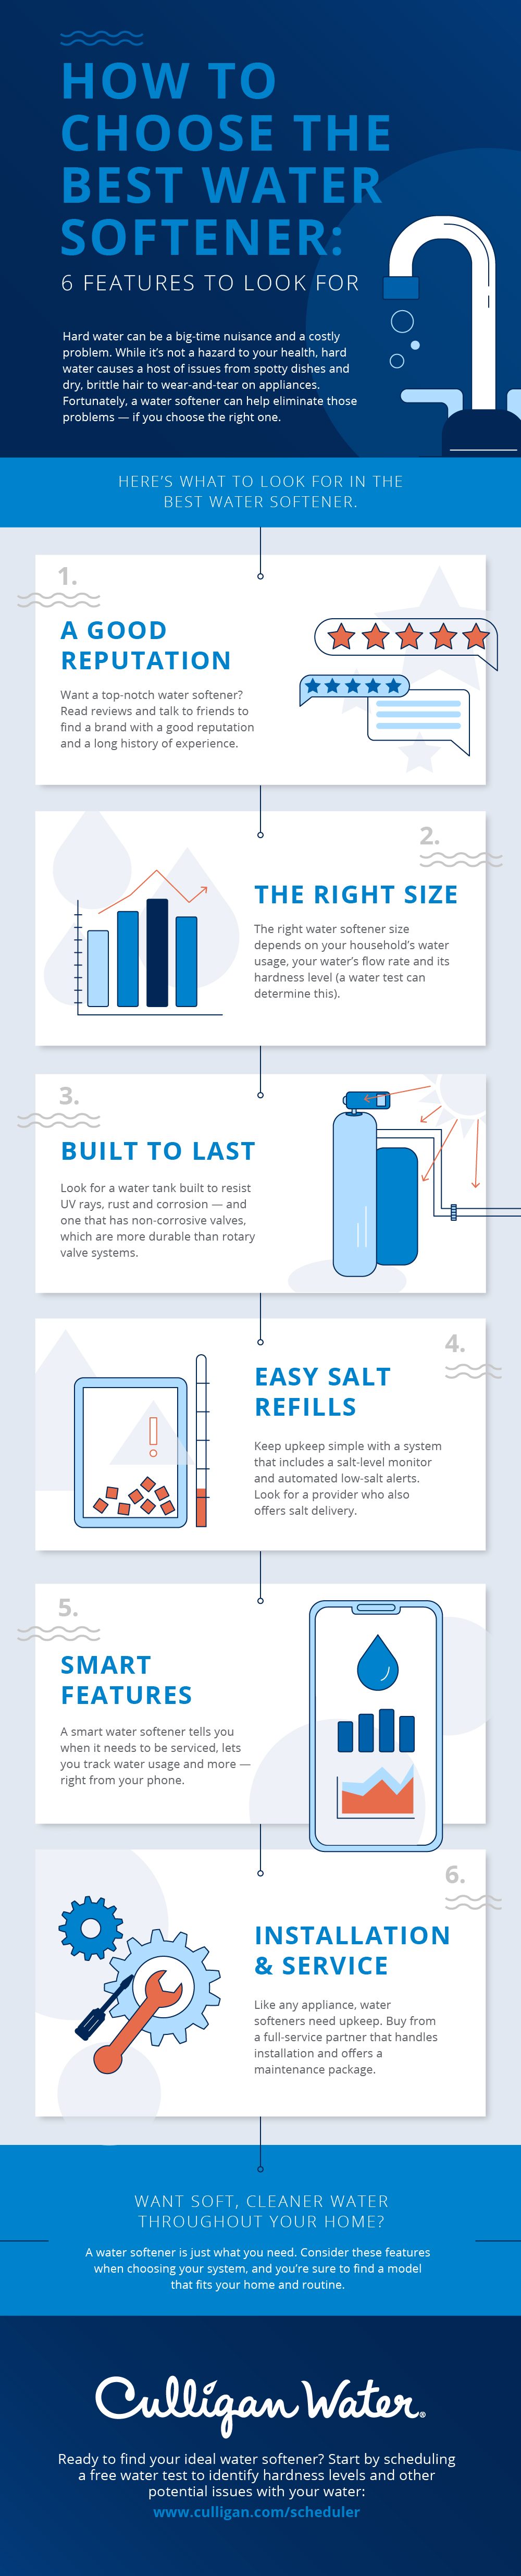 infograhic: how to choose the best water softener